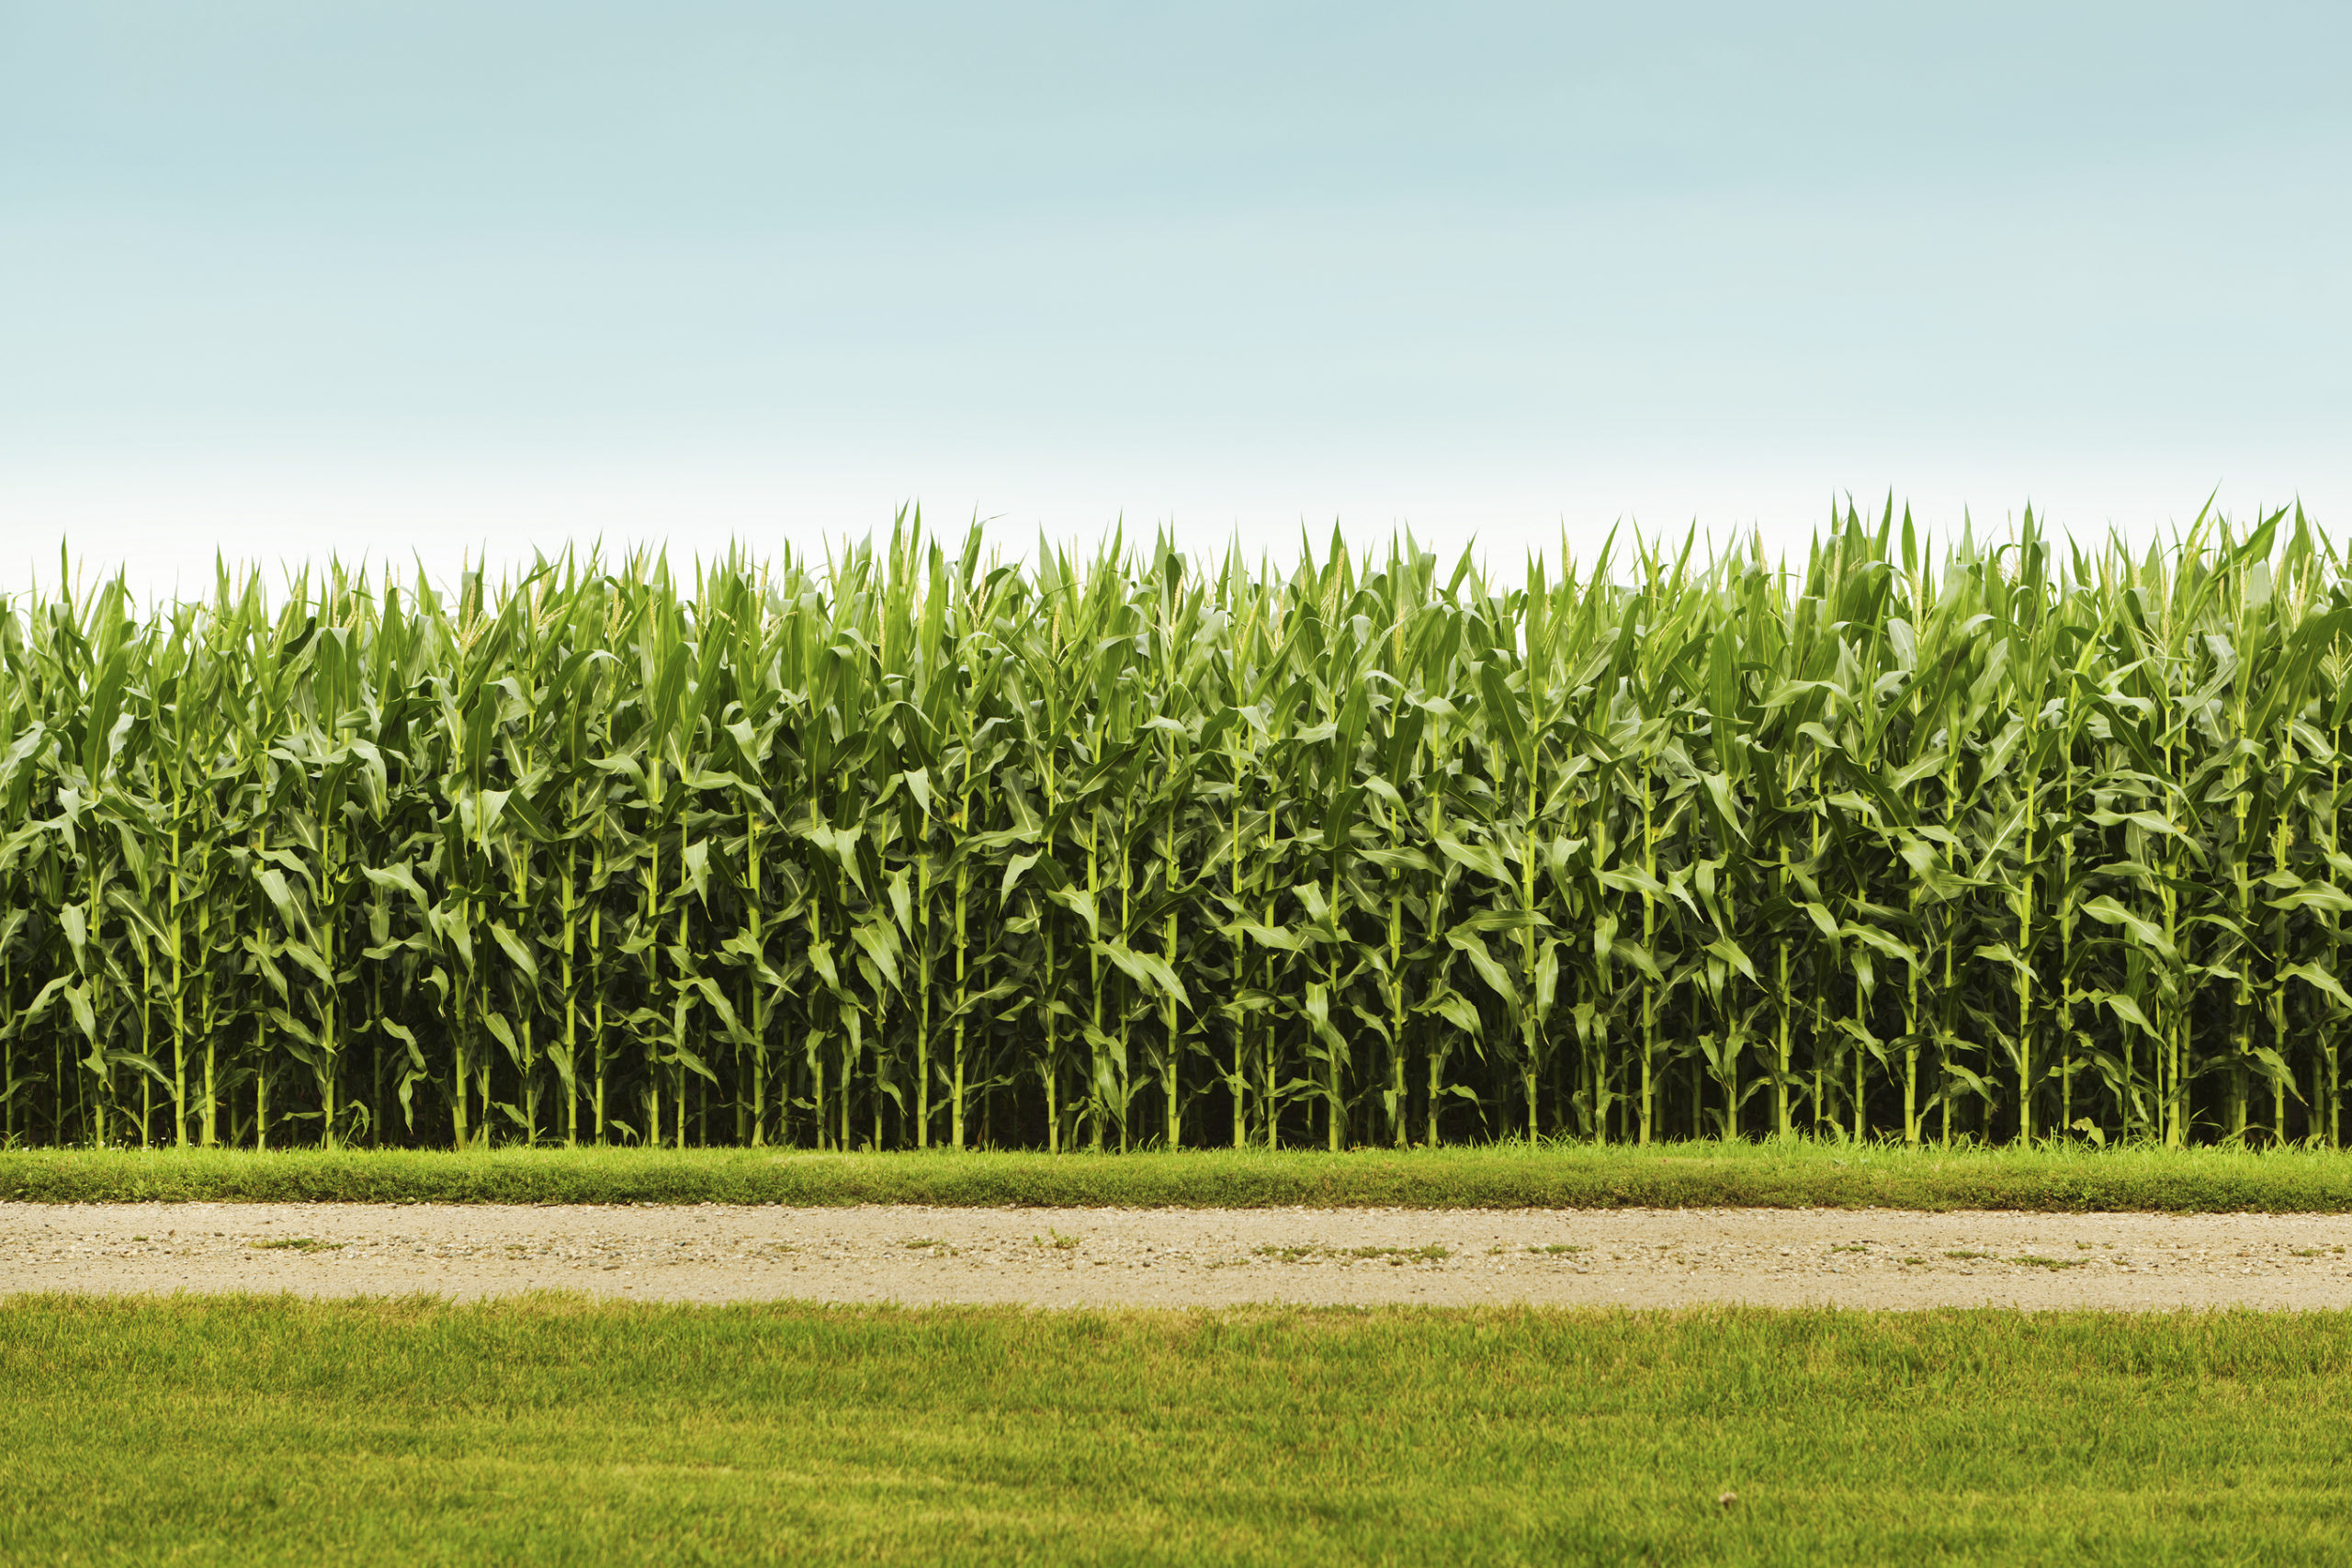 Subject: A corn field with rows of corn plants.